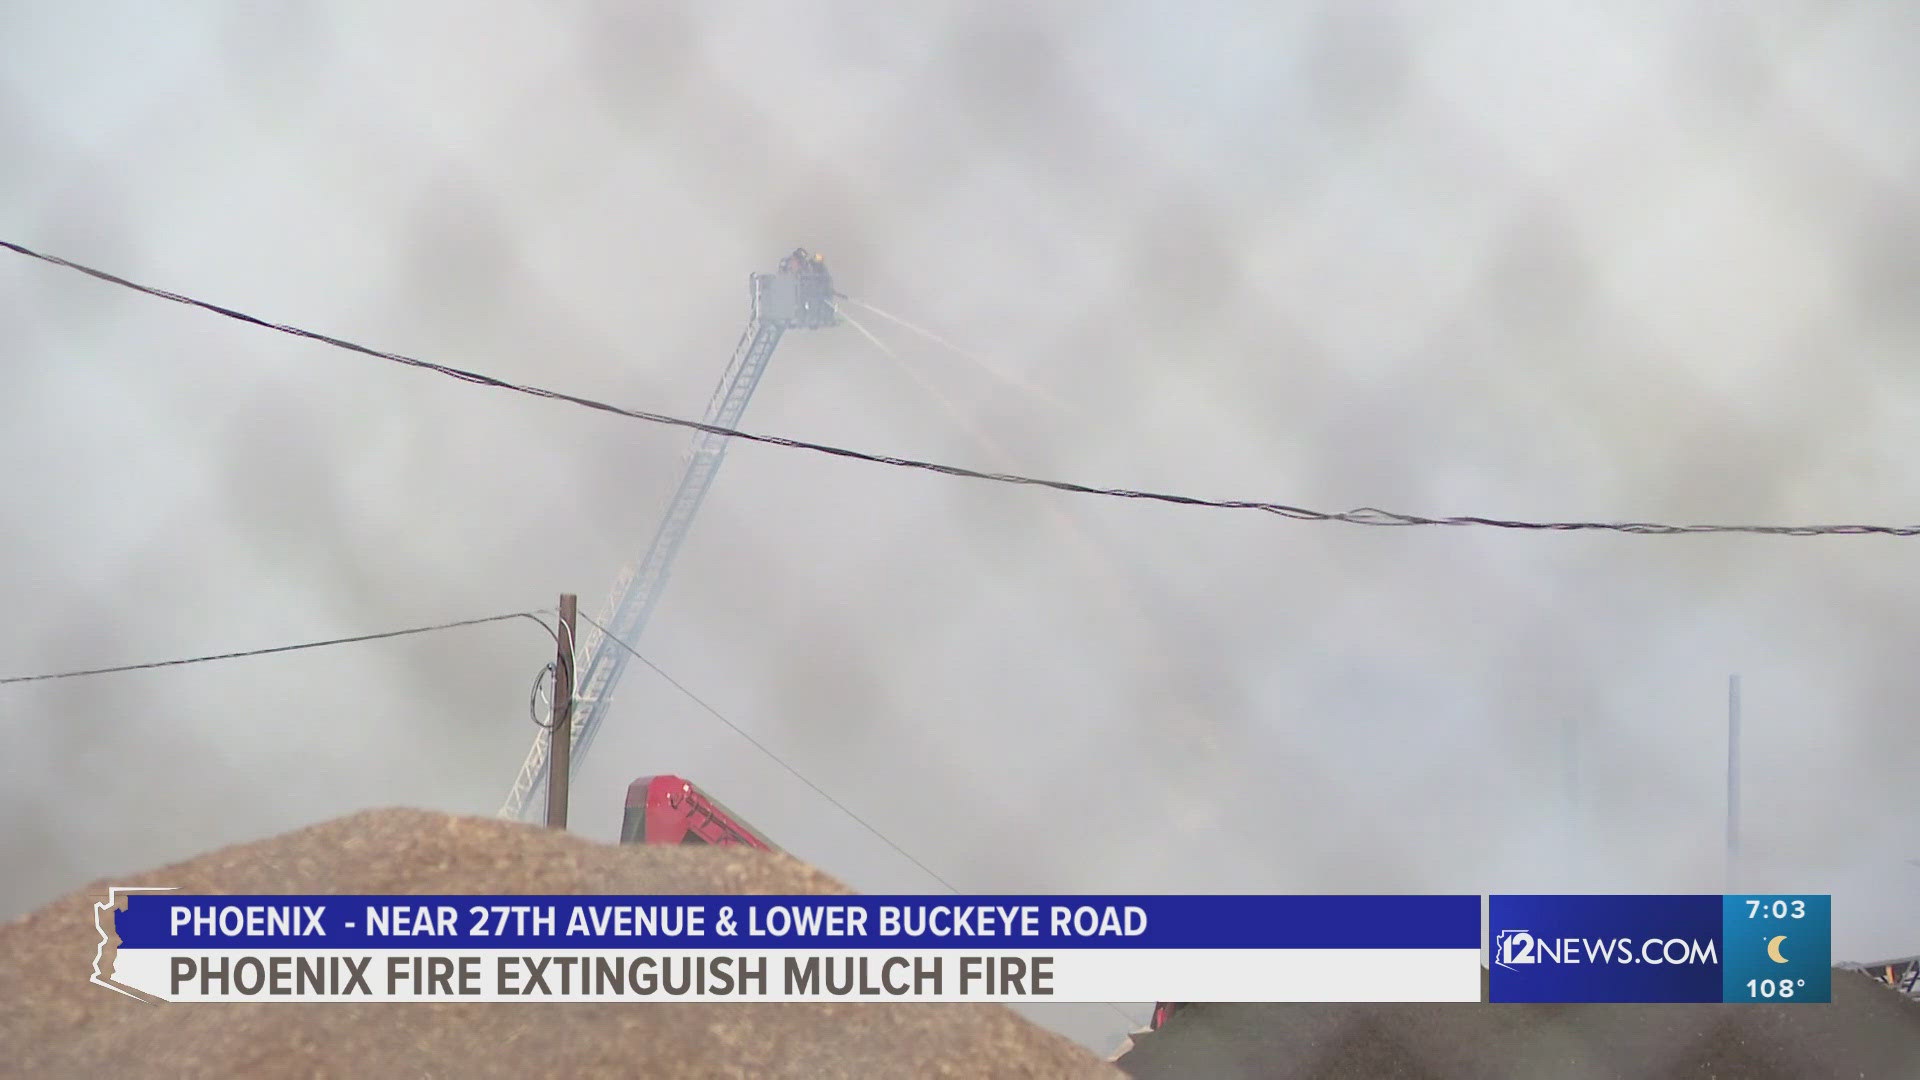 The fire broke out Sunday afternoon near 27th Avenue and Lower Buckeye Road.